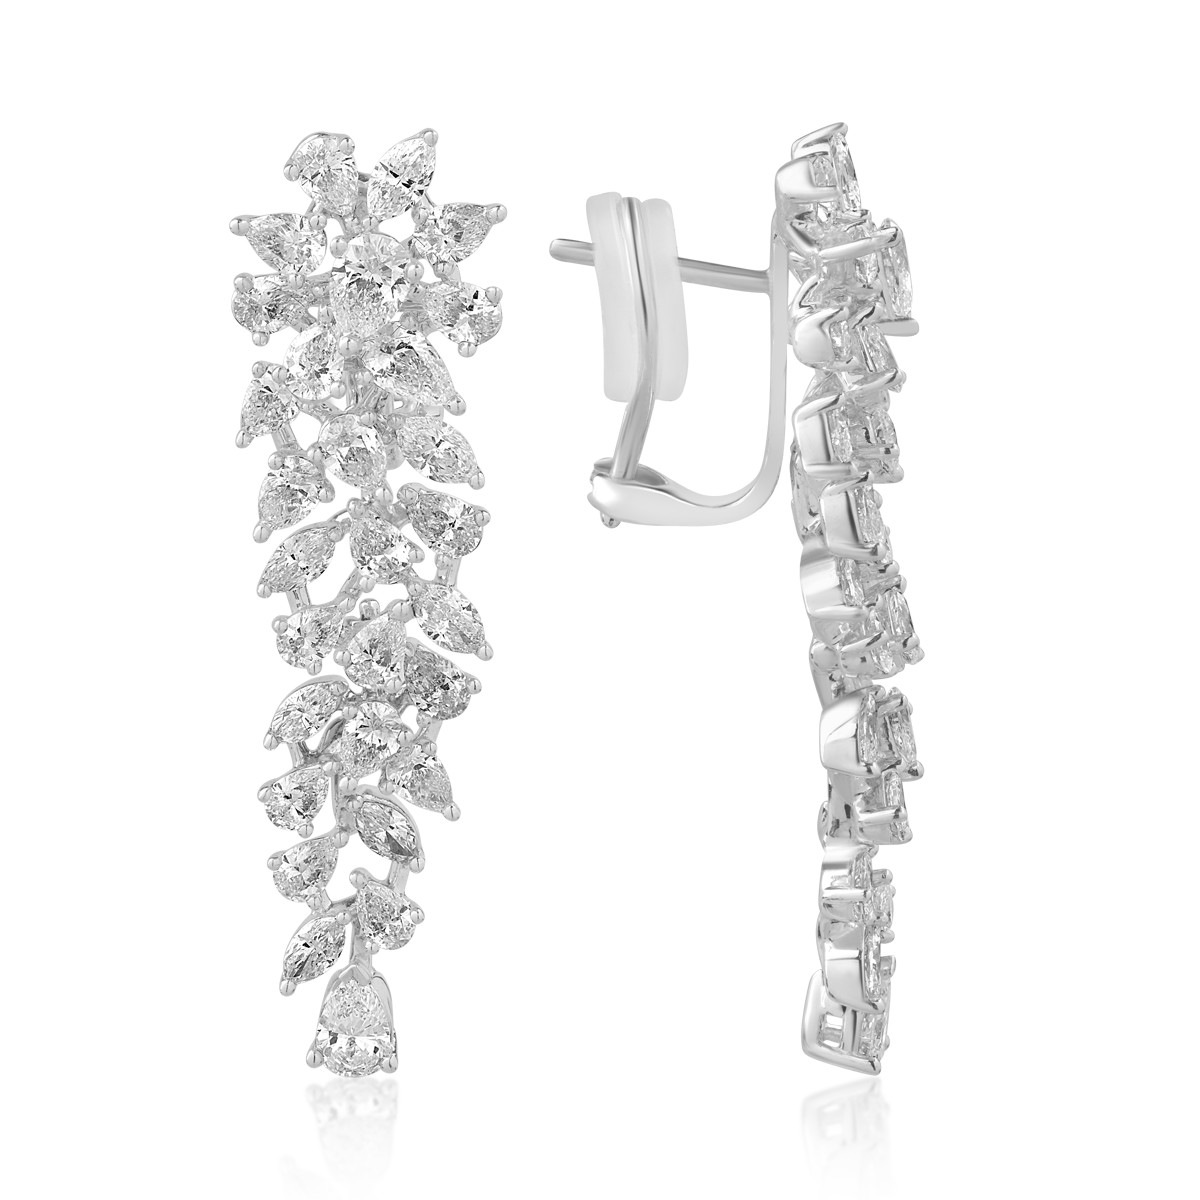 18K white gold earrings with 5.63ct diamonds